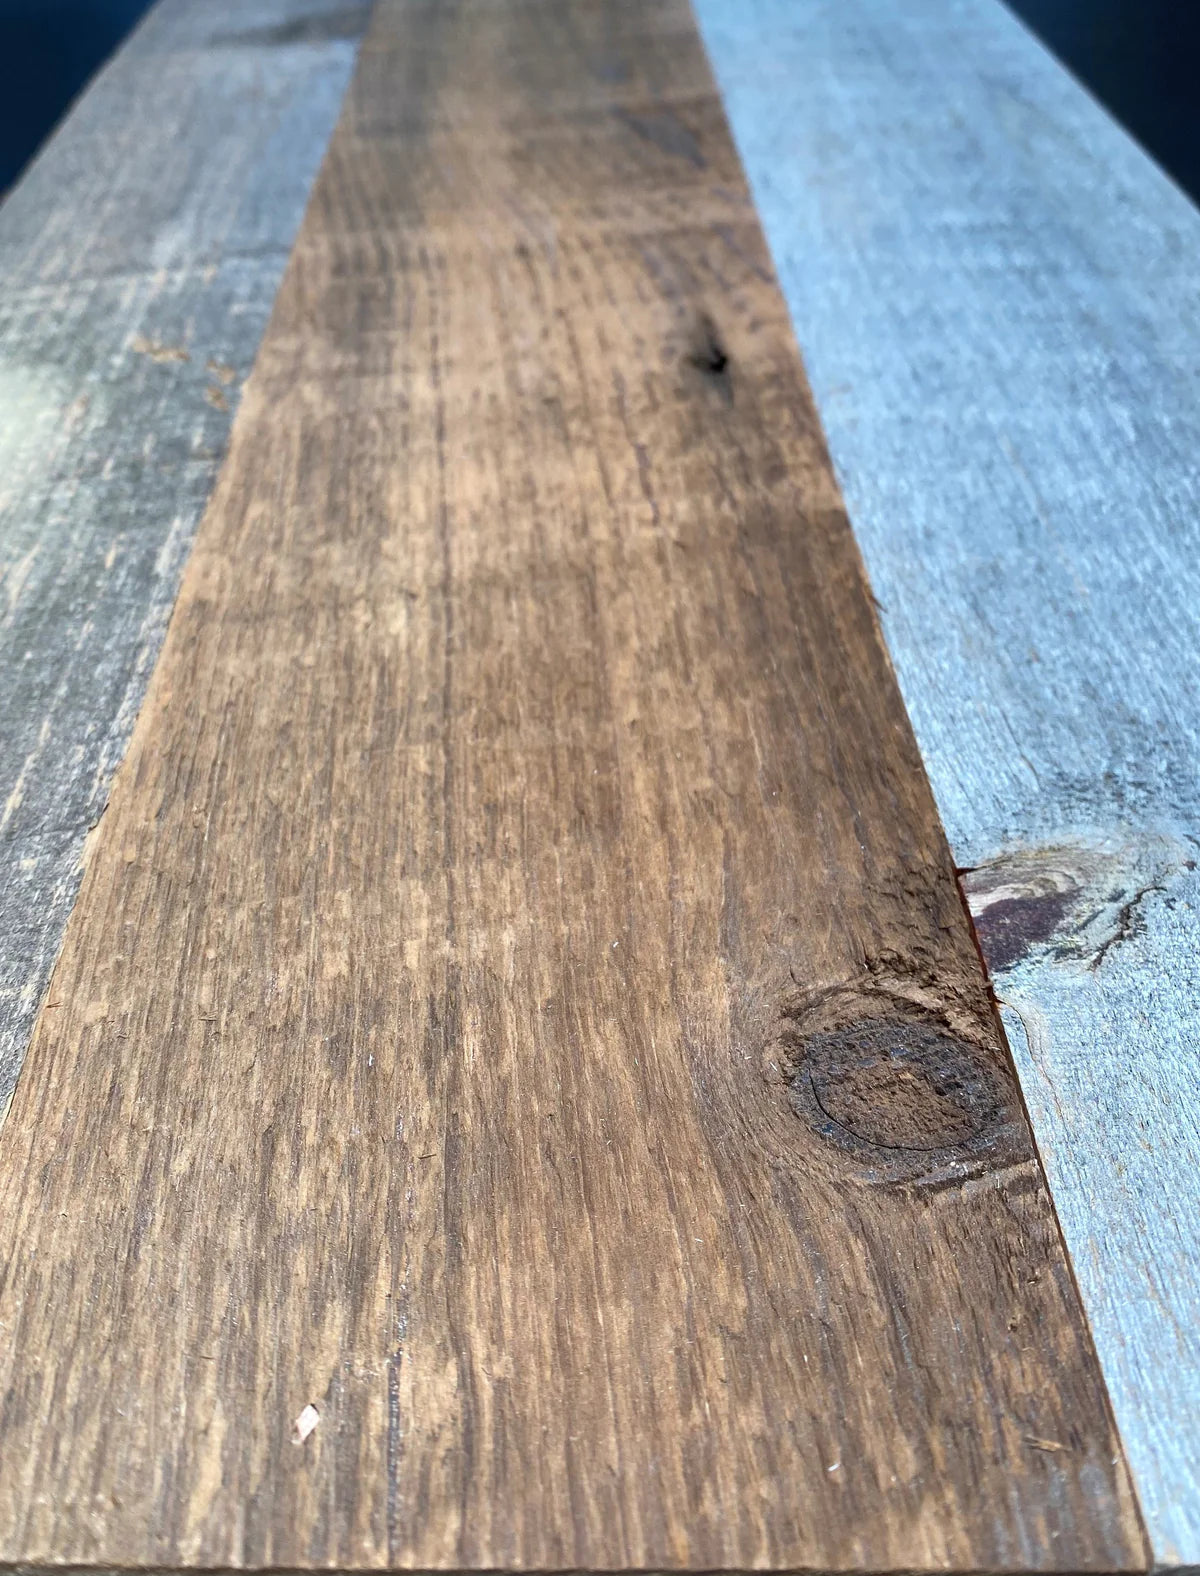 SPECIAL LIMITED TIME OFFER! Authentic American Barn Wood Bundle (10 sq. ft., maximum length 36")